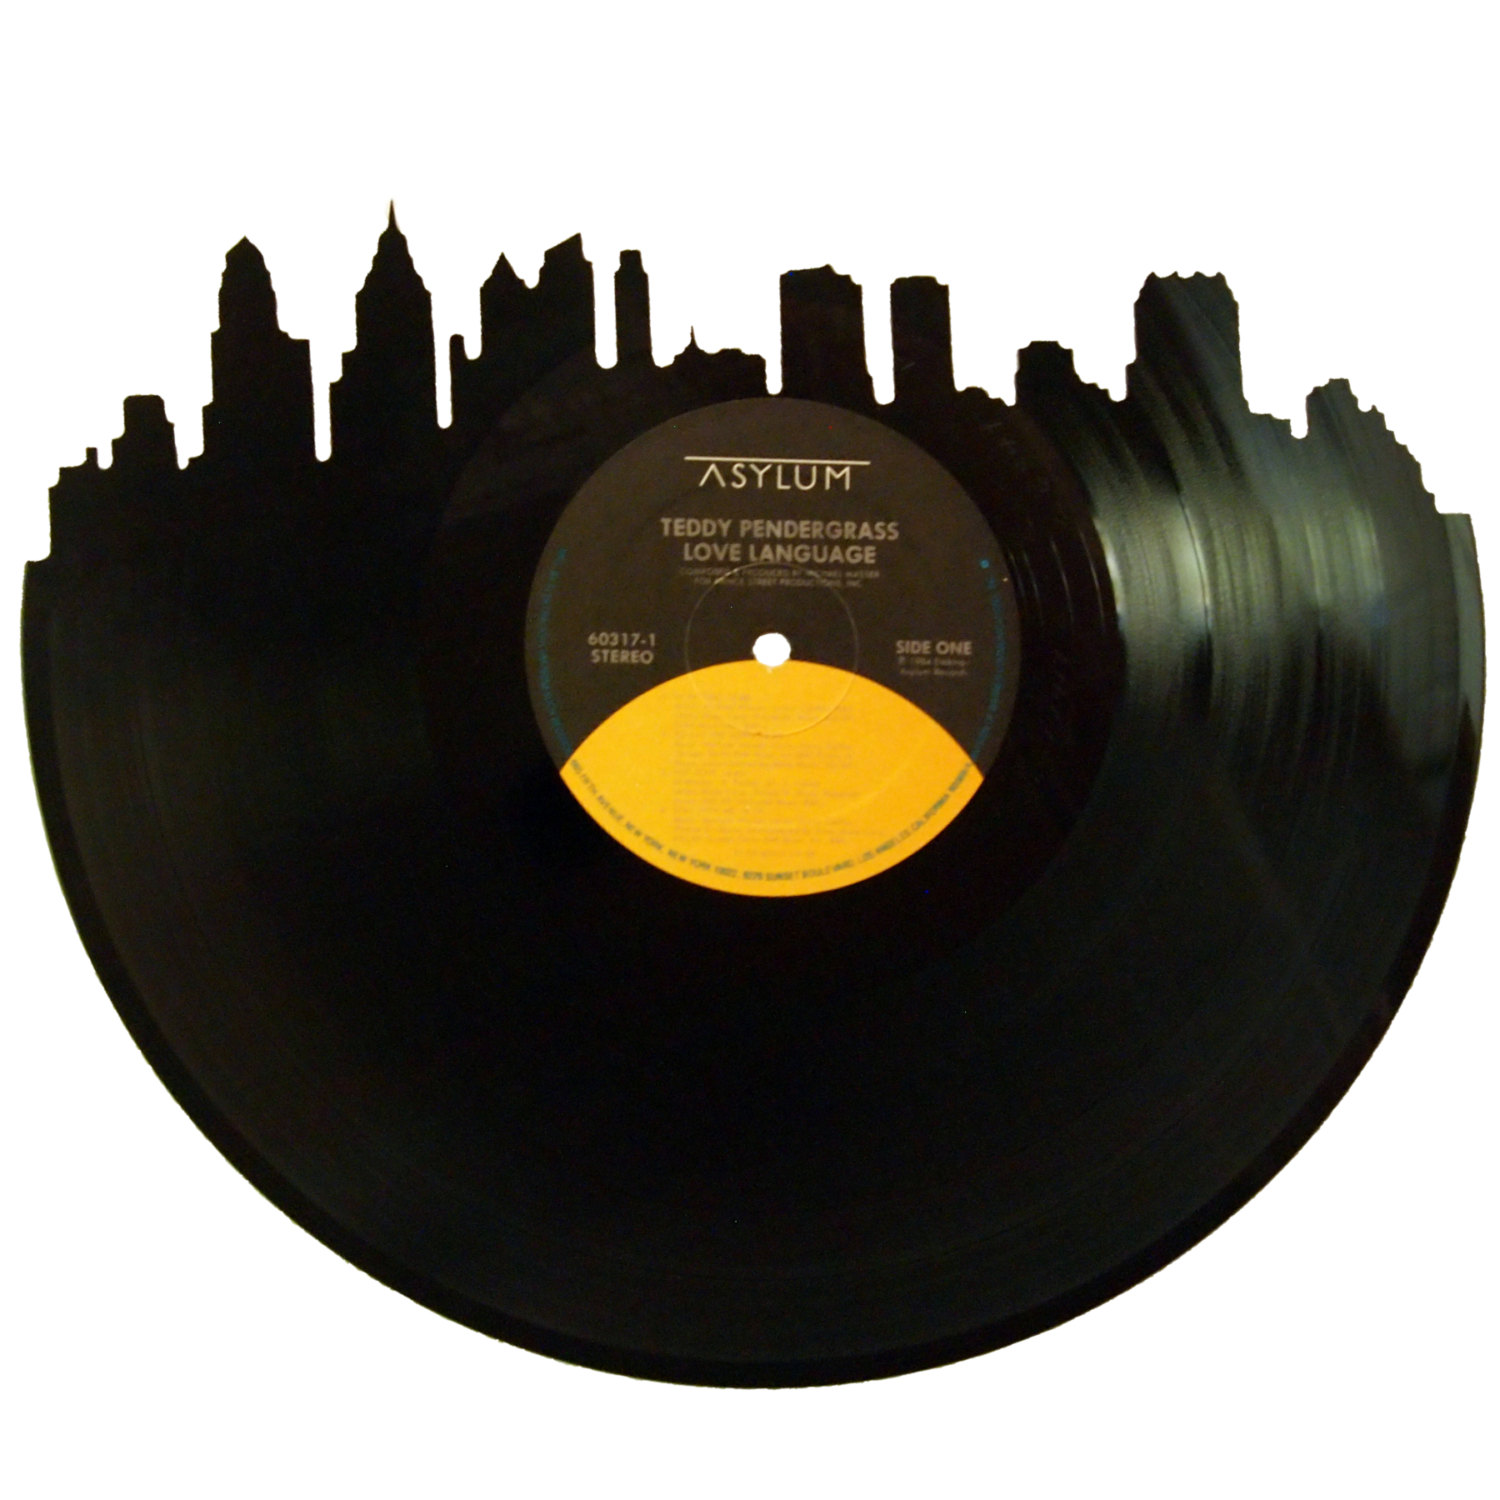 Popular items for philly skyline on Etsy